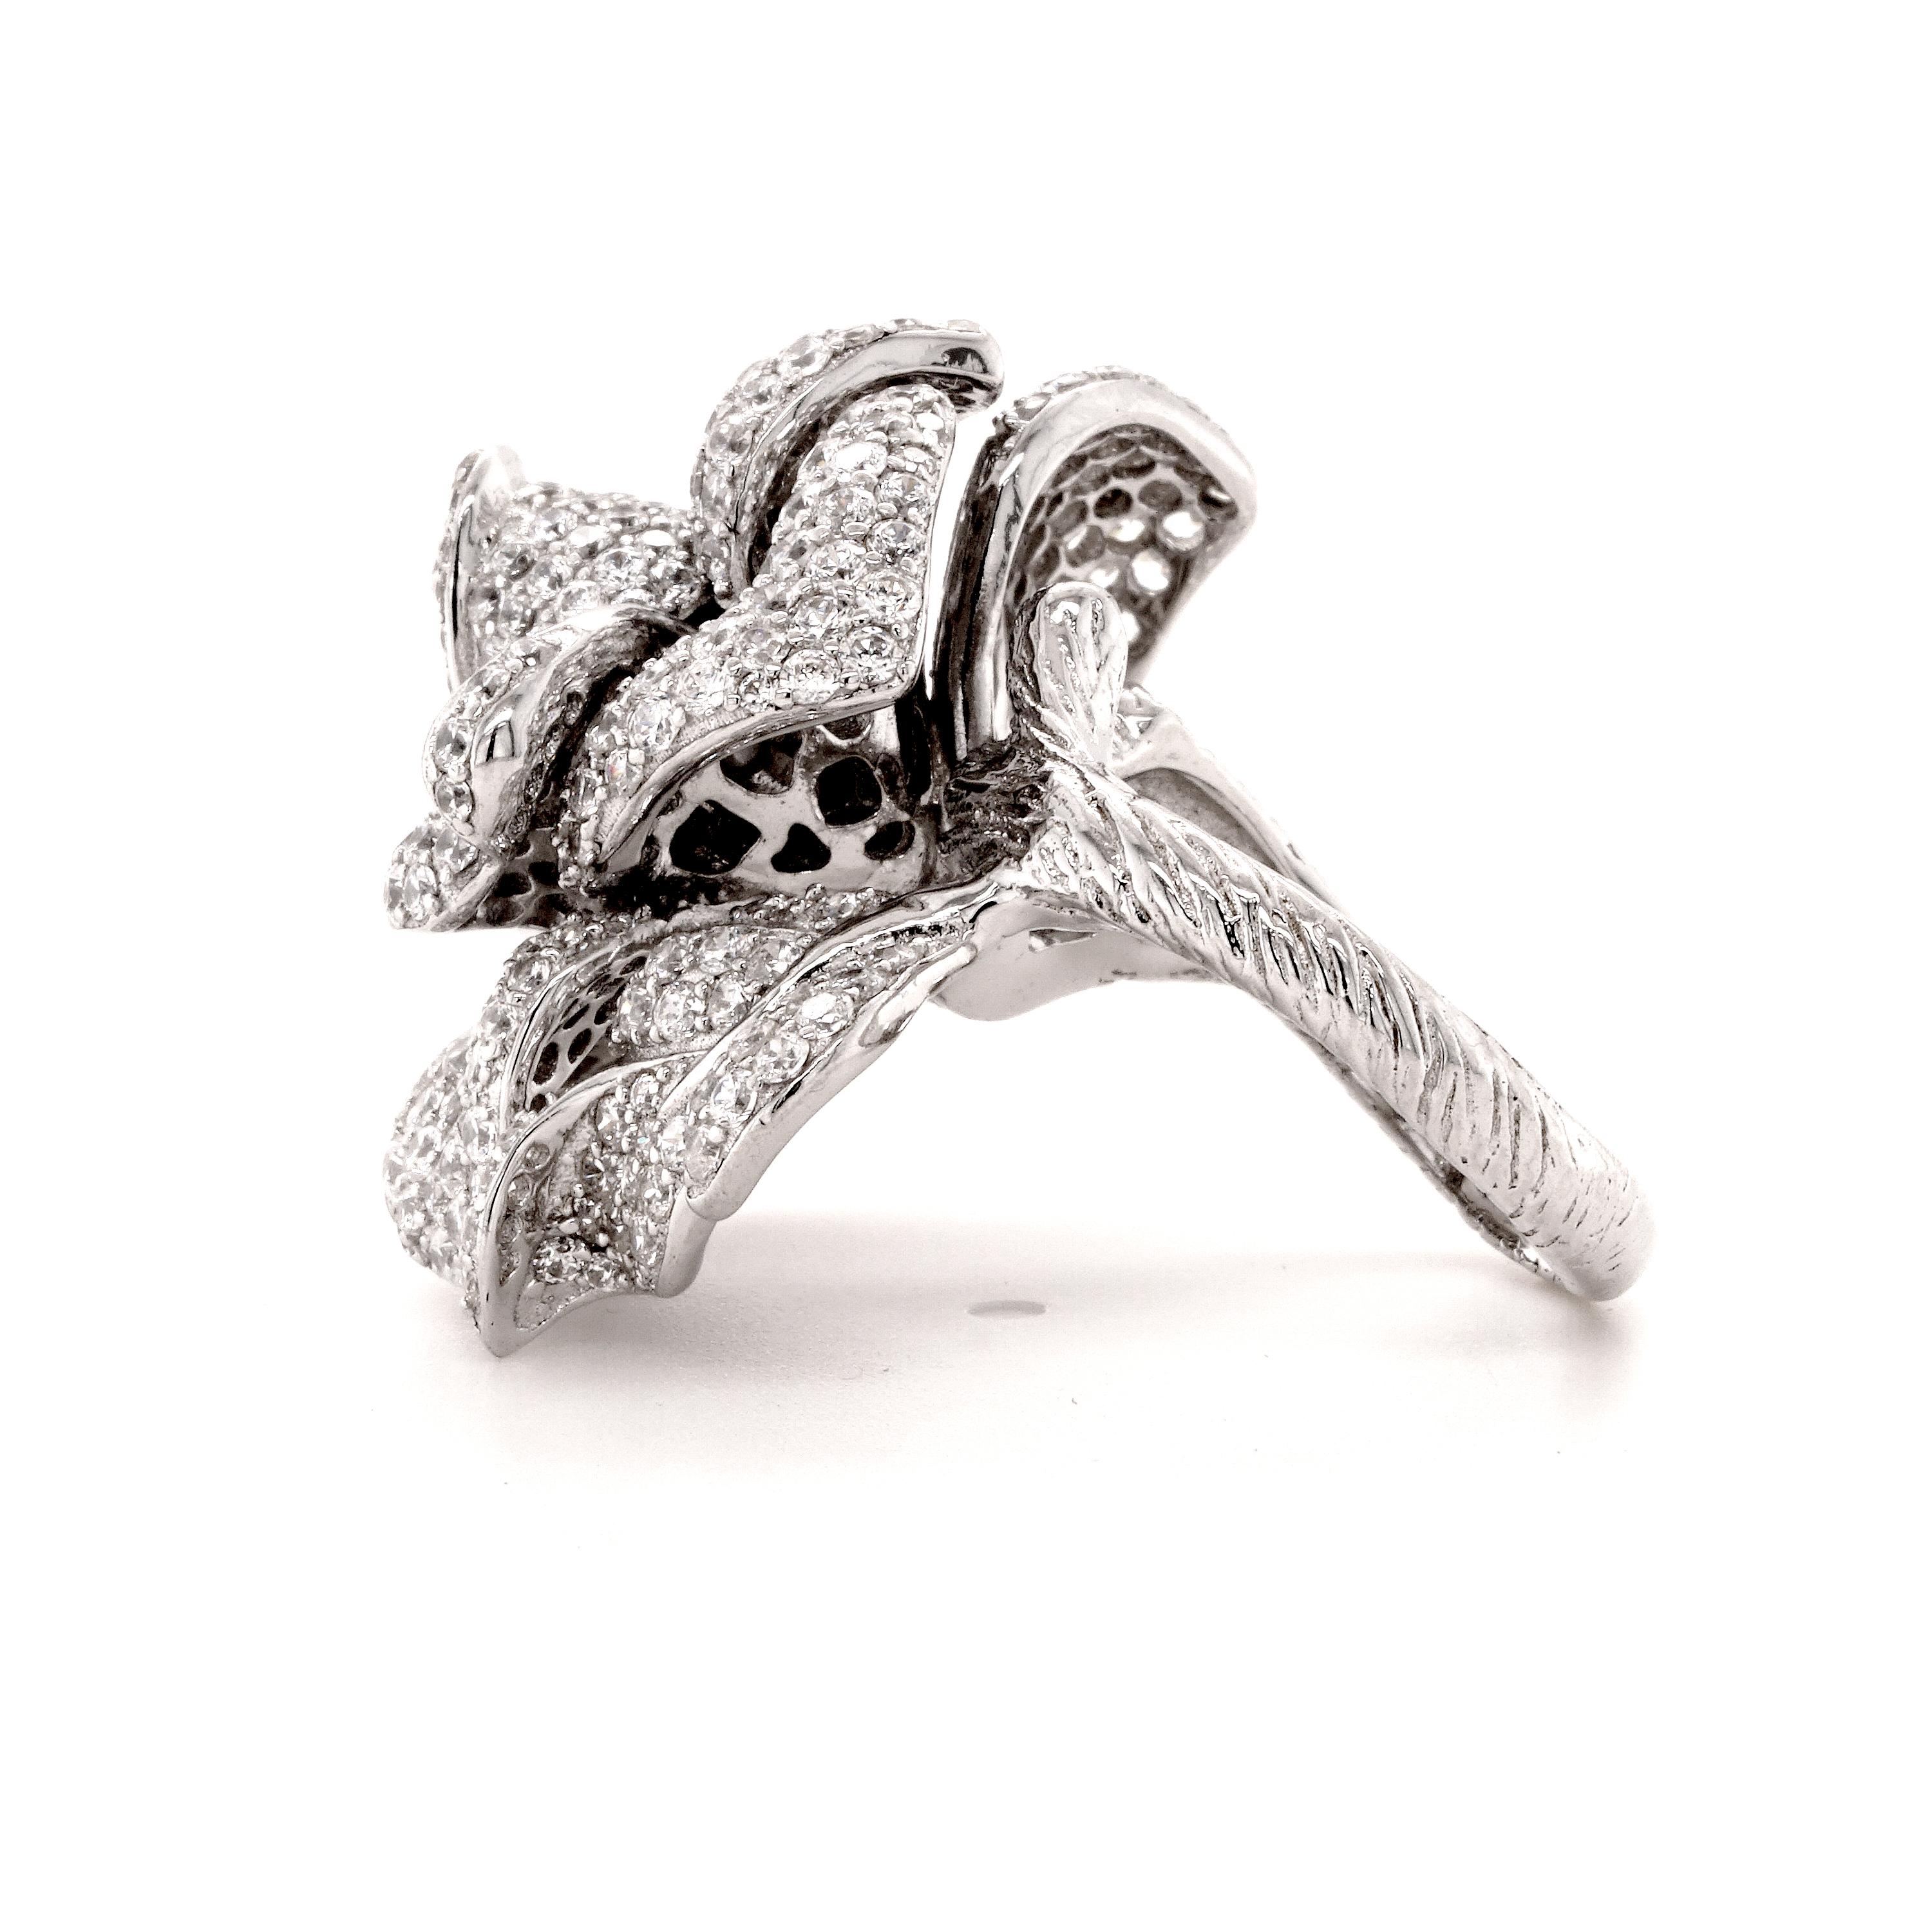 Brilliant Cut Fei Liu Cubic Zirconia Sterling Silver Peony Cocktail Ring